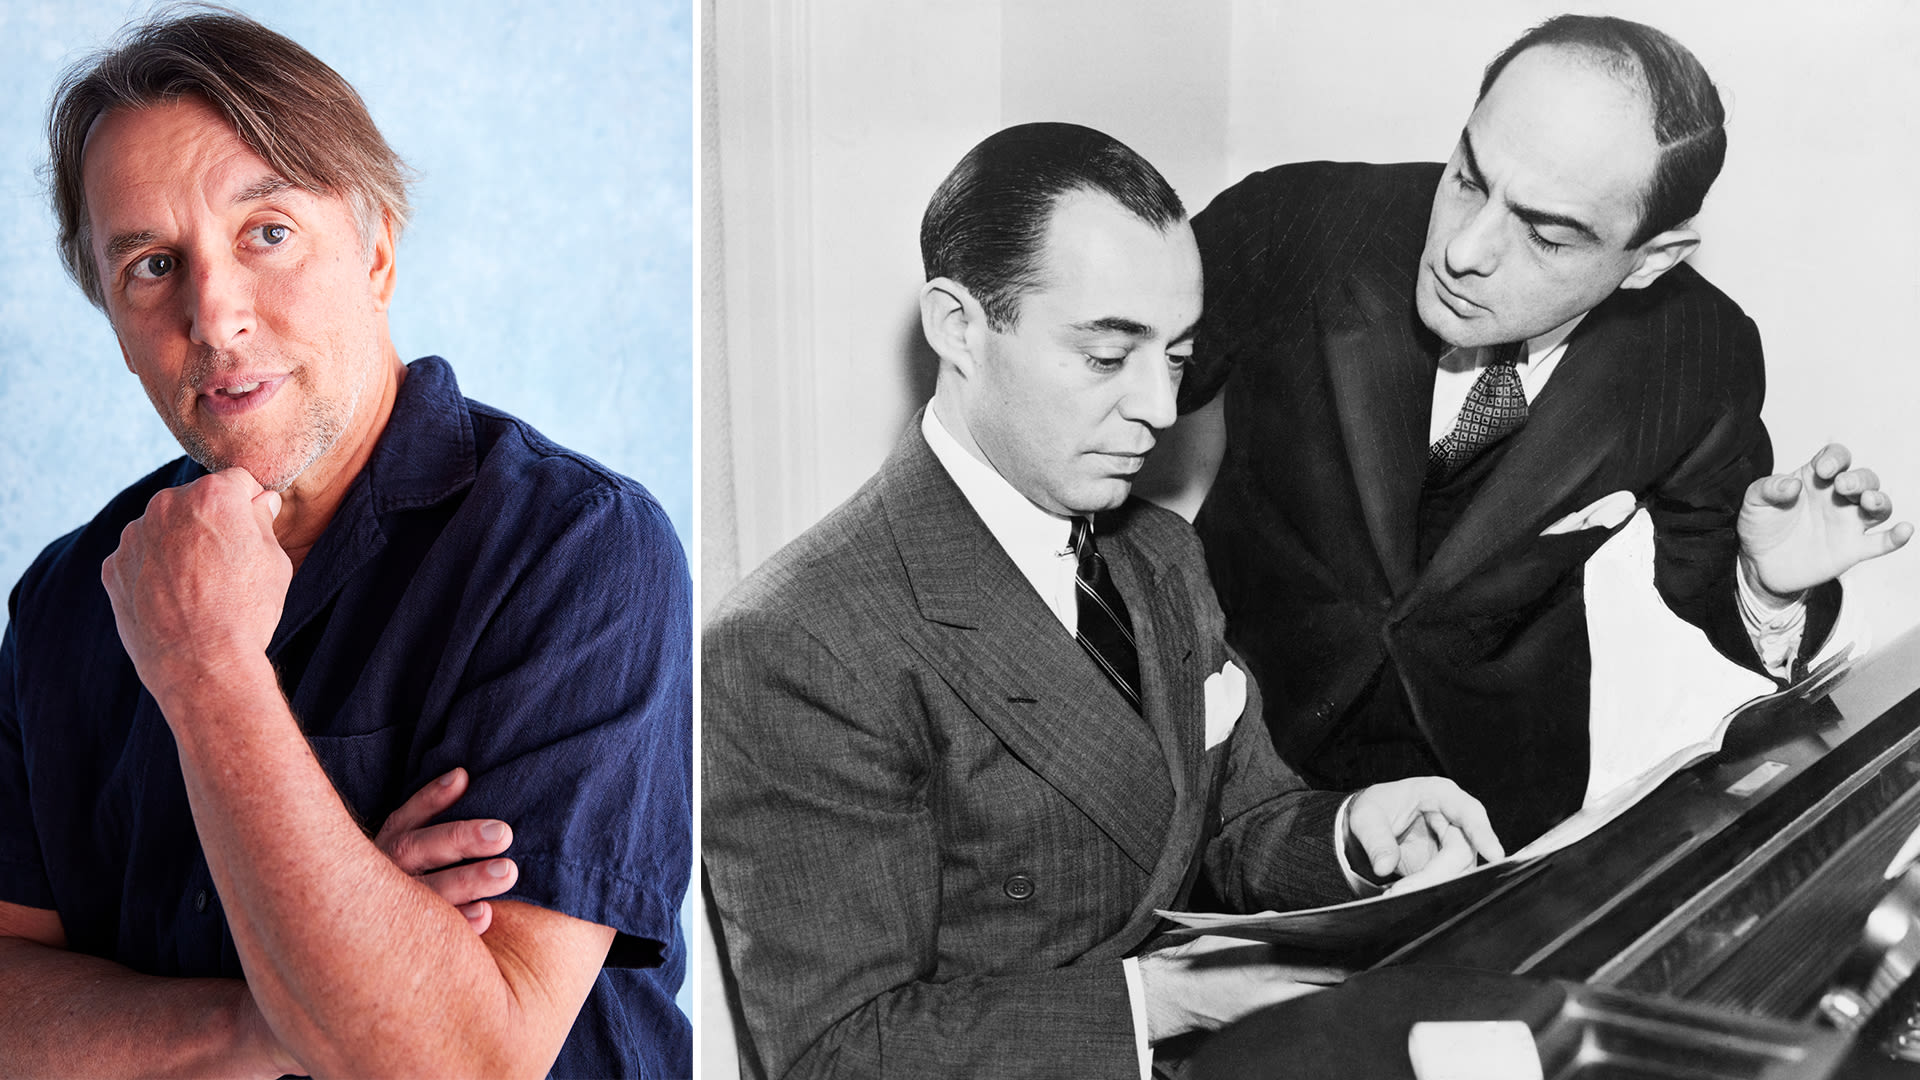 ...Film ‘Blue Moon’ On Famed American Songwriters Richard Rodgers & Lorenz Hart, Their Parting Of Ways